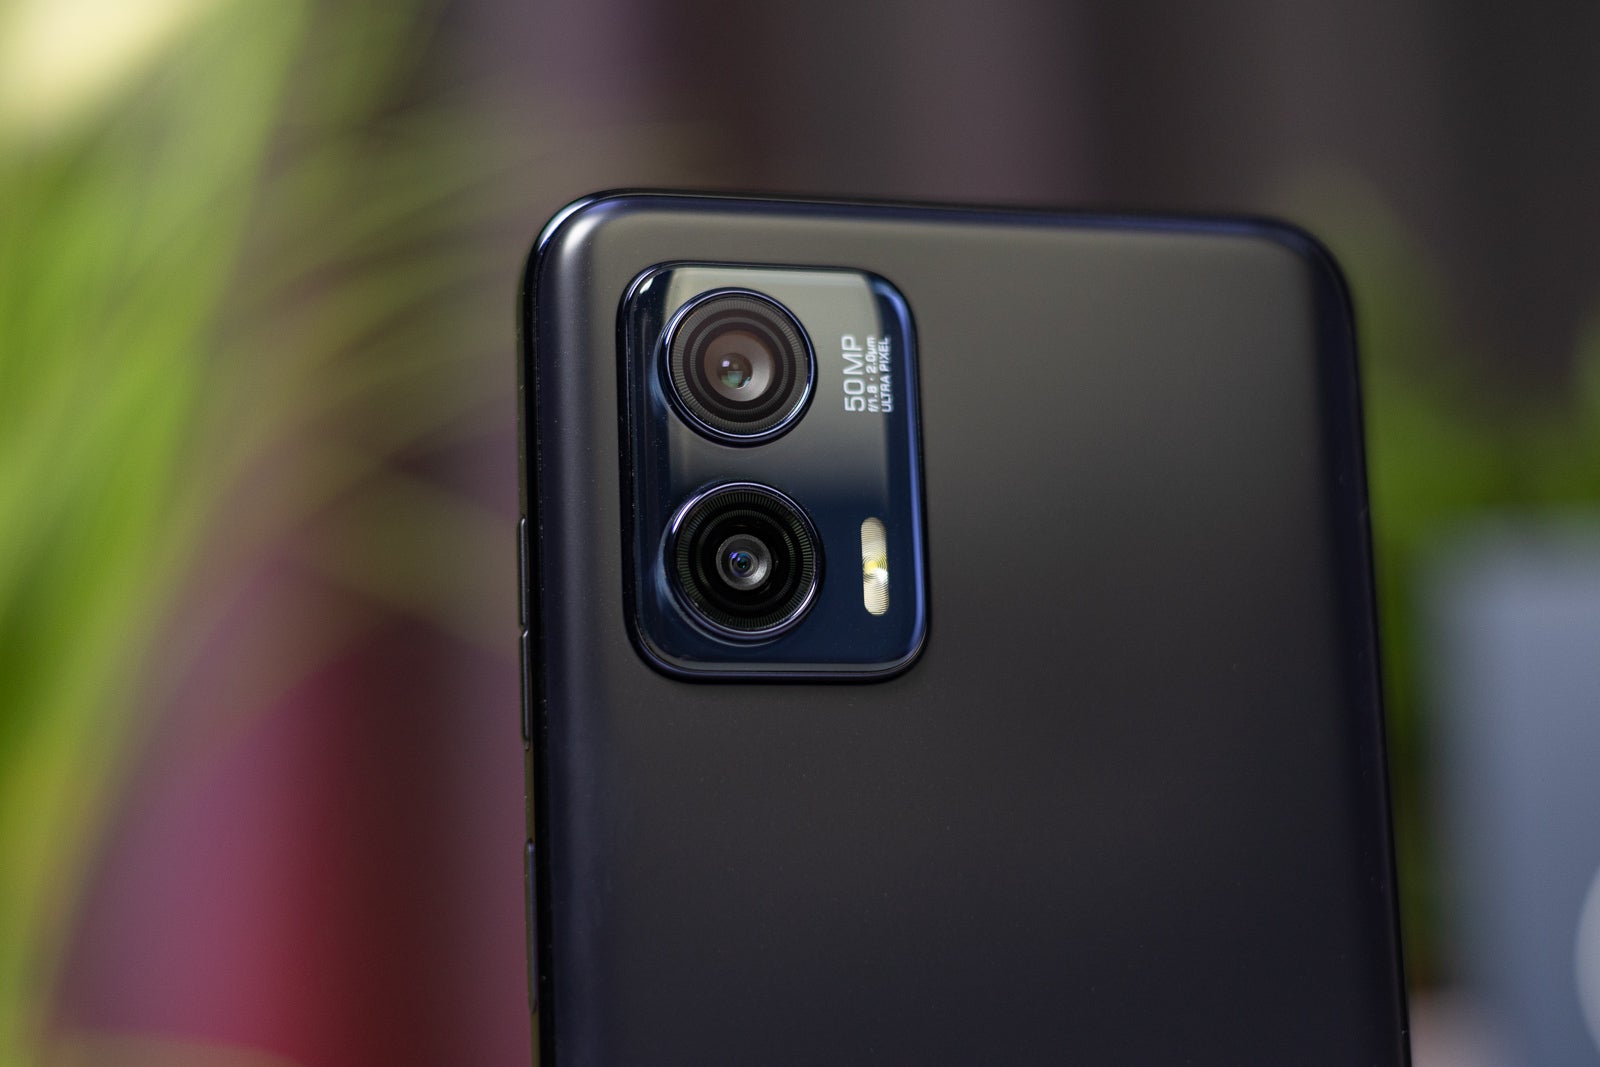 Here's a quick look at the Motorola G73, an upcoming 5G mid-range